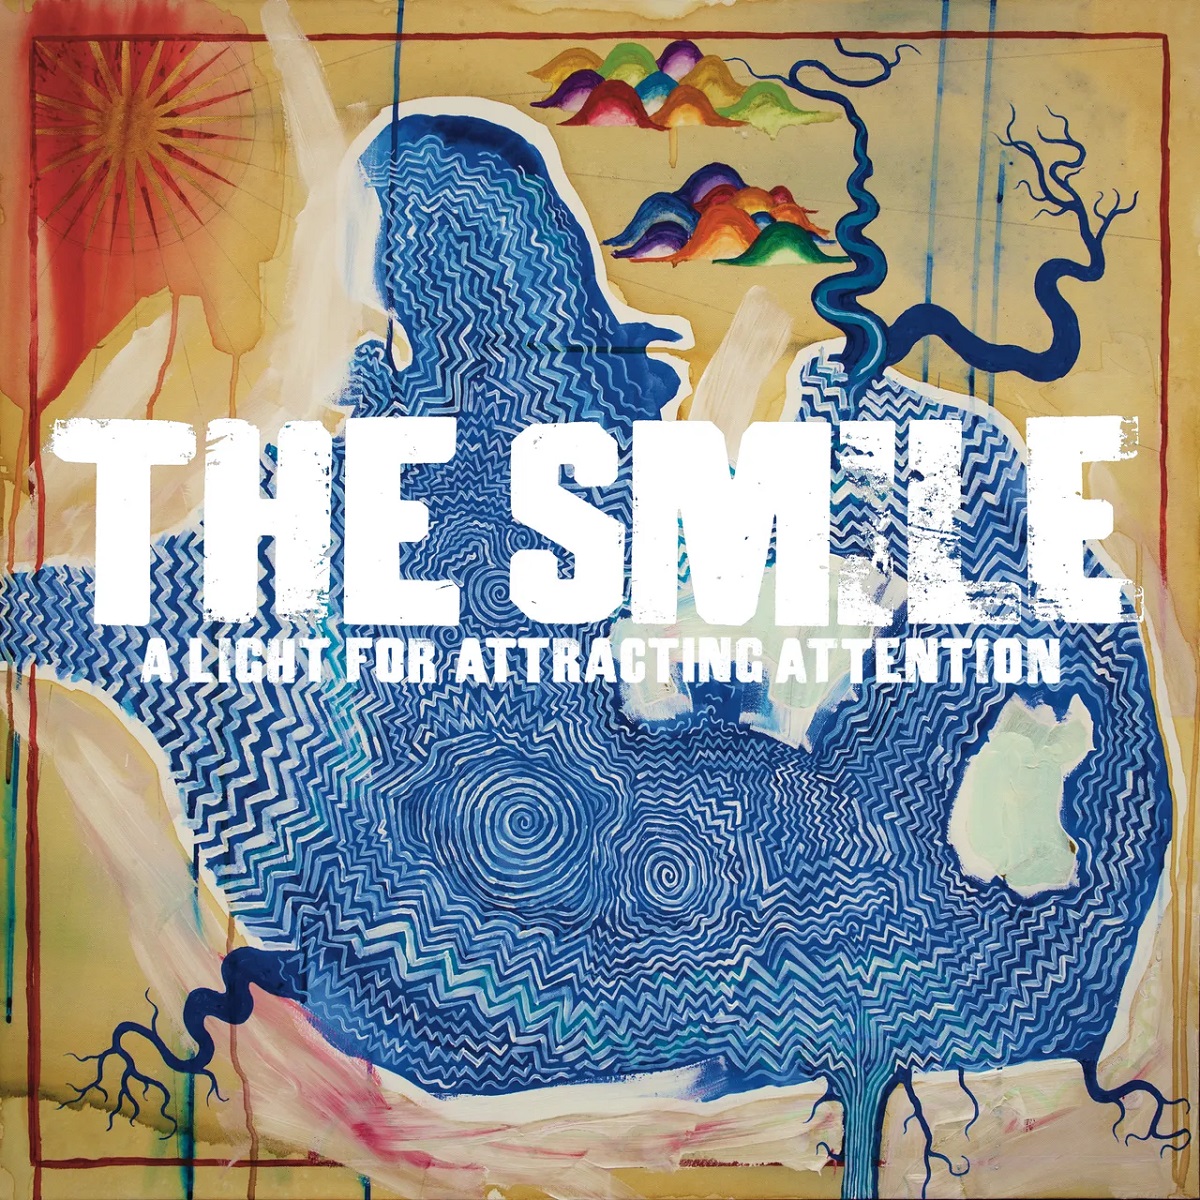 The Smile - "A Light for Attracting Attention"